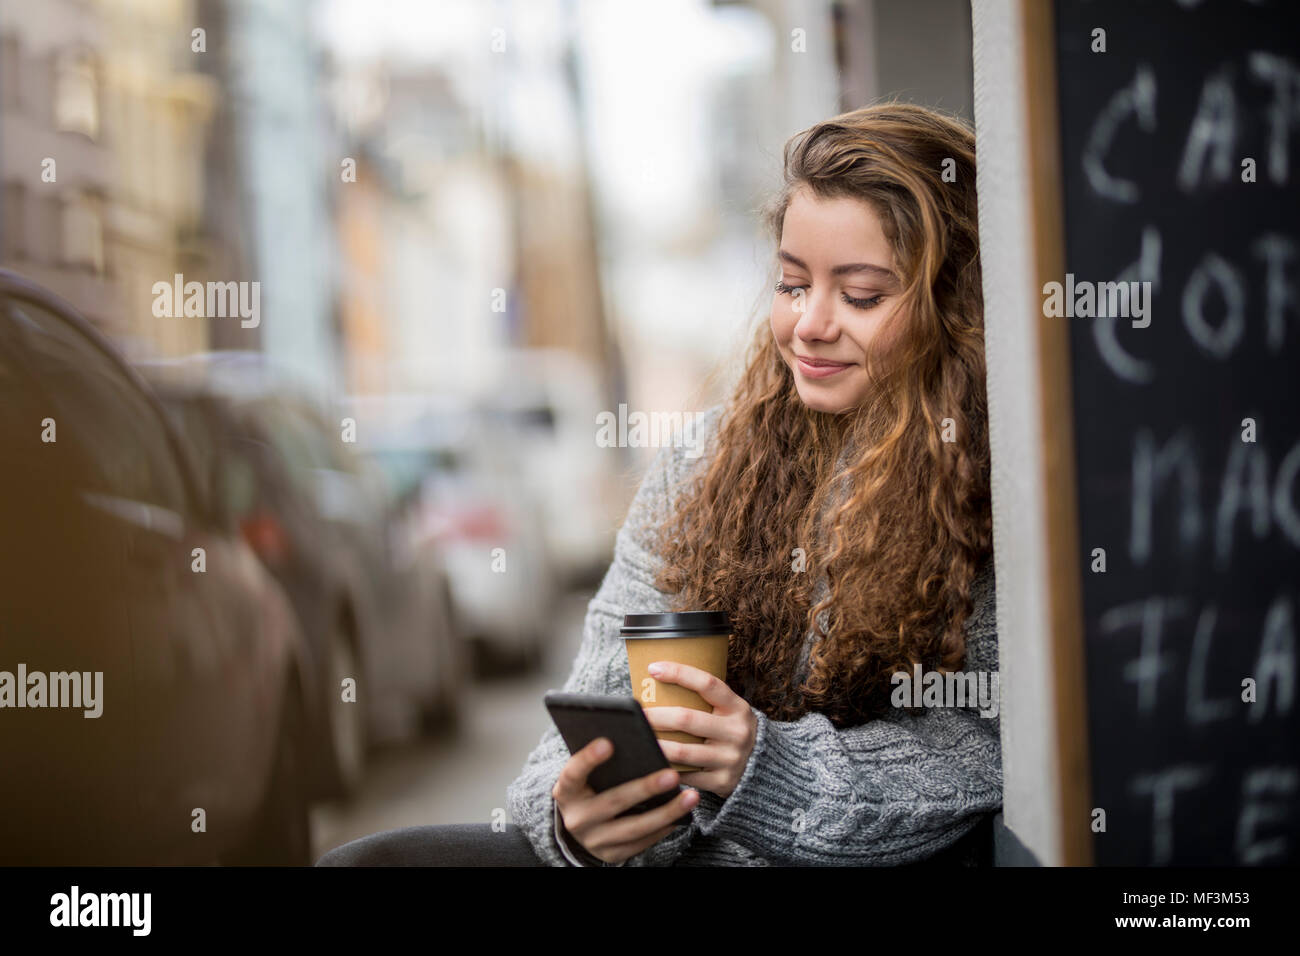 Teenage girl drinking coffee, reading text messages Stock Photo